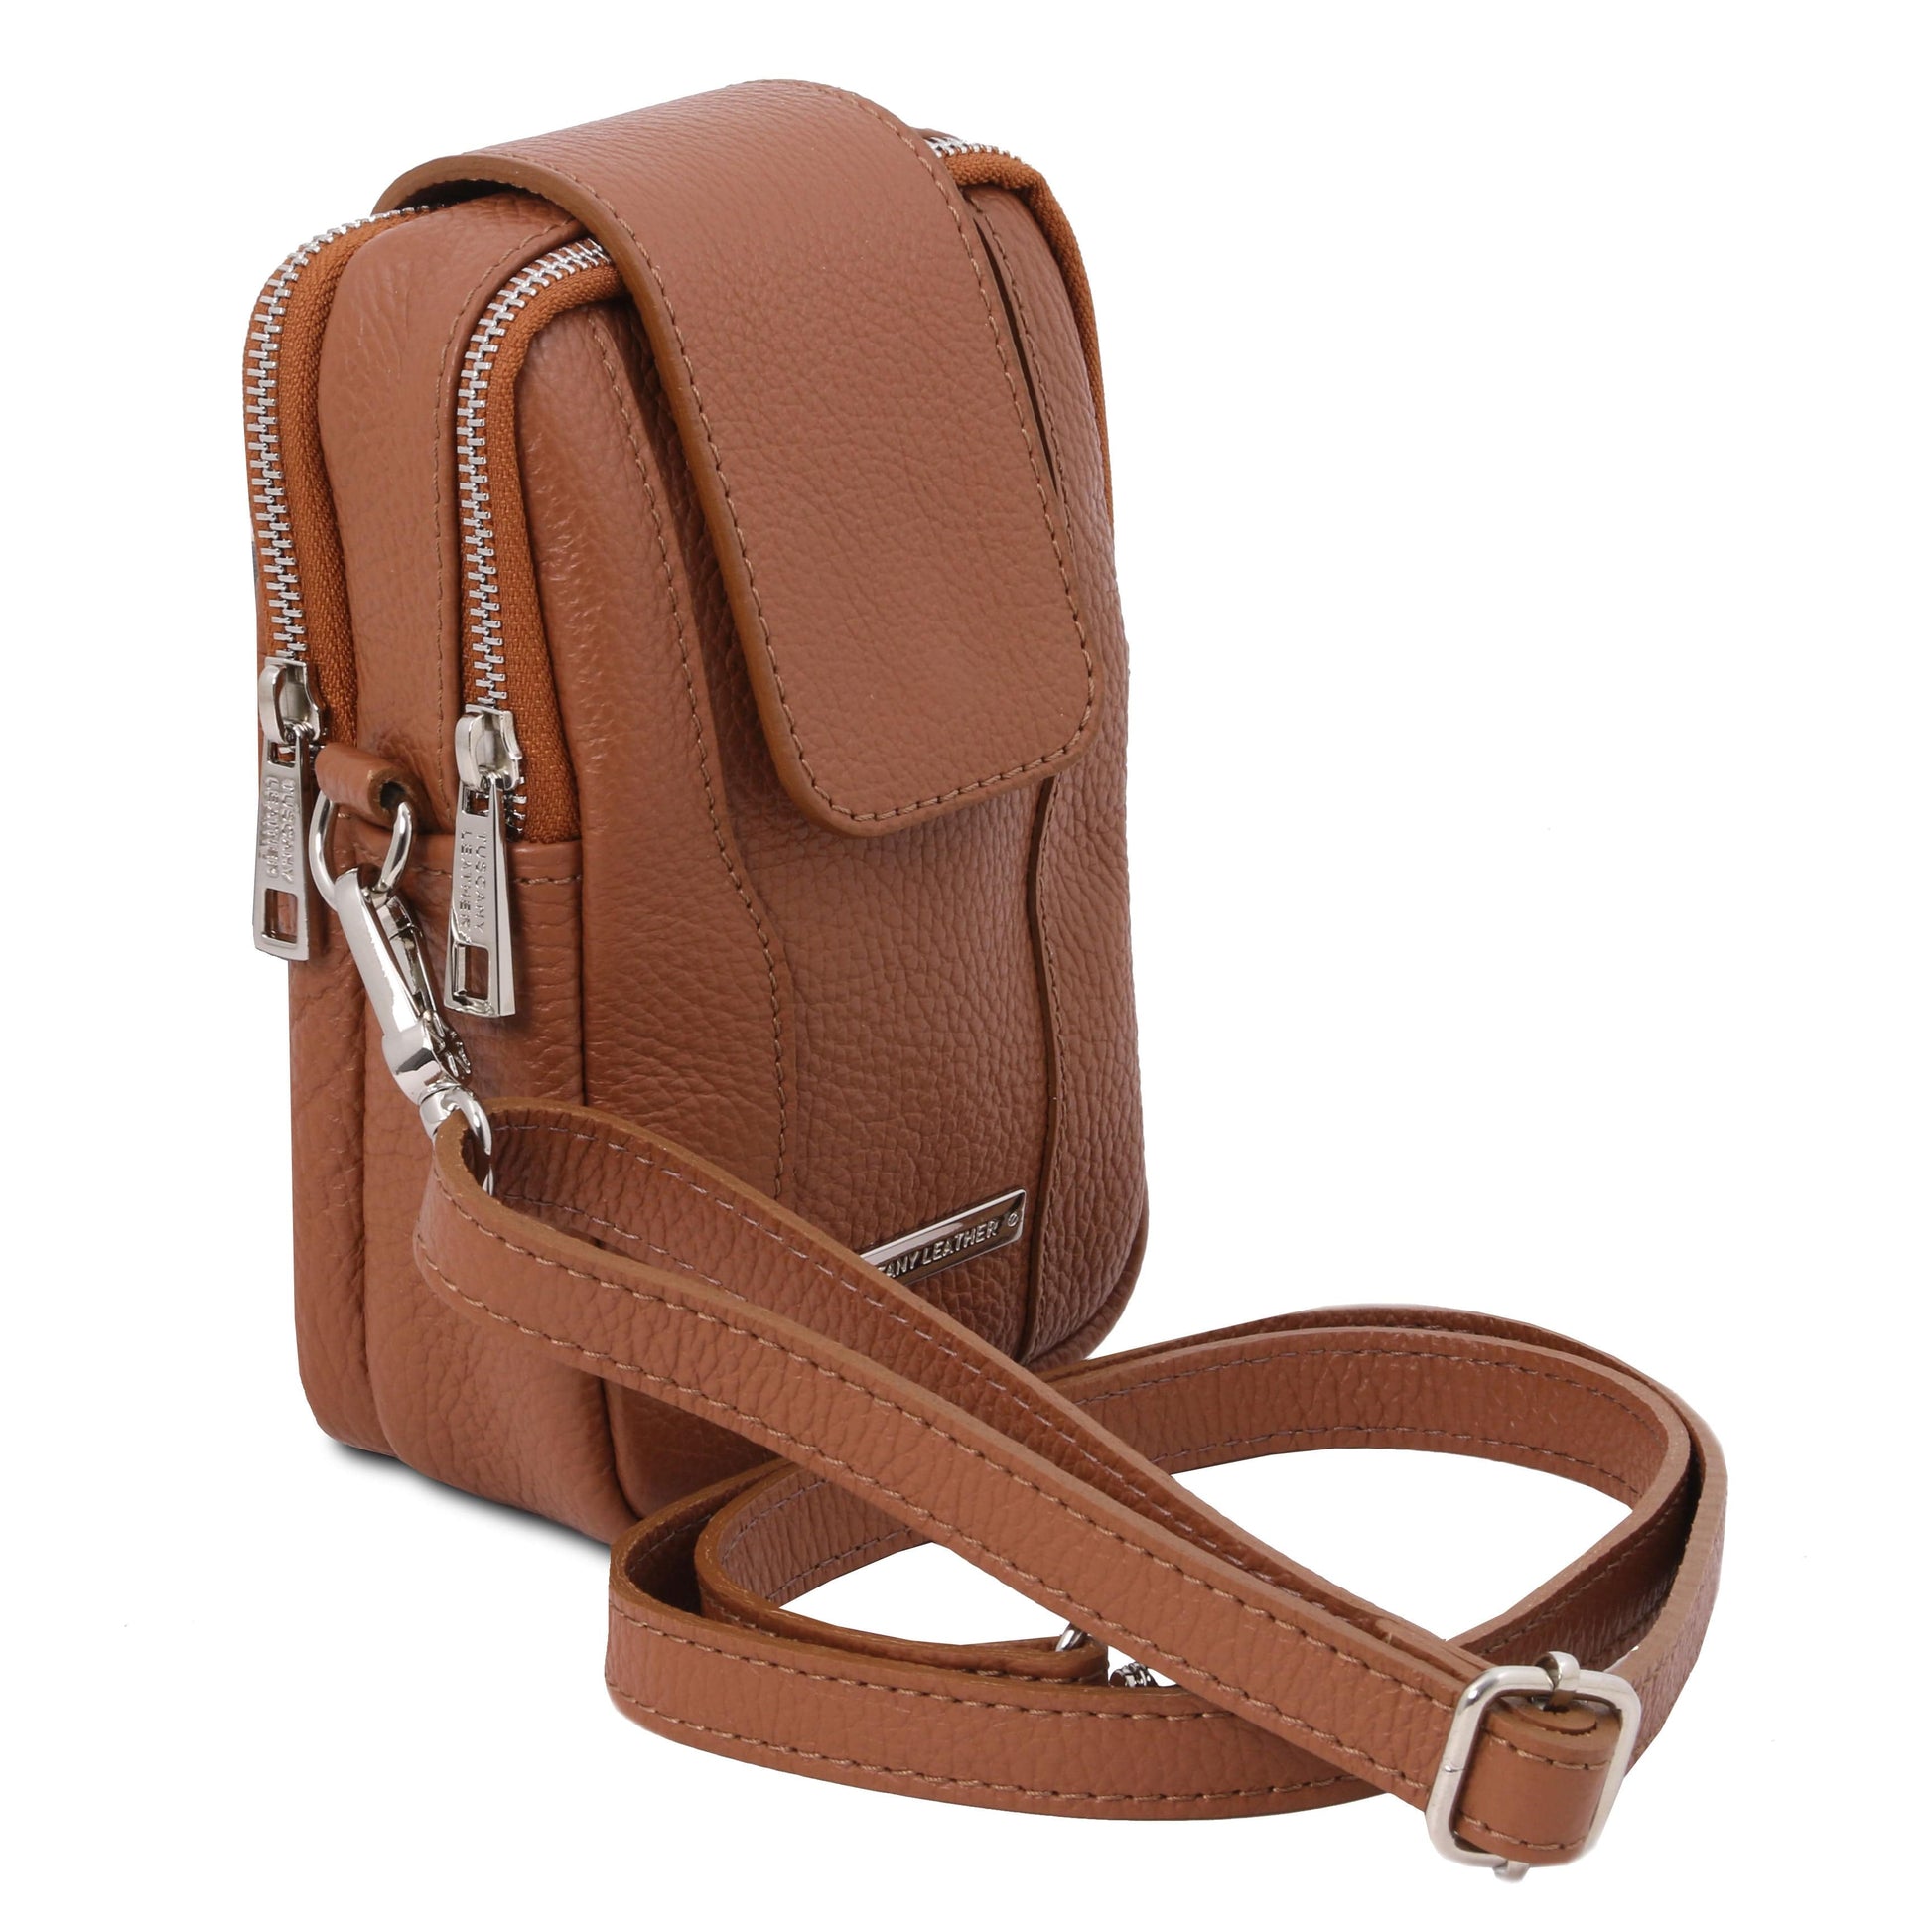 TL Bag - Soft Leather cellphone holder mini cross body bag | TL141698 - Premium Leather shoulder bags - Shop now at San Rocco Italia